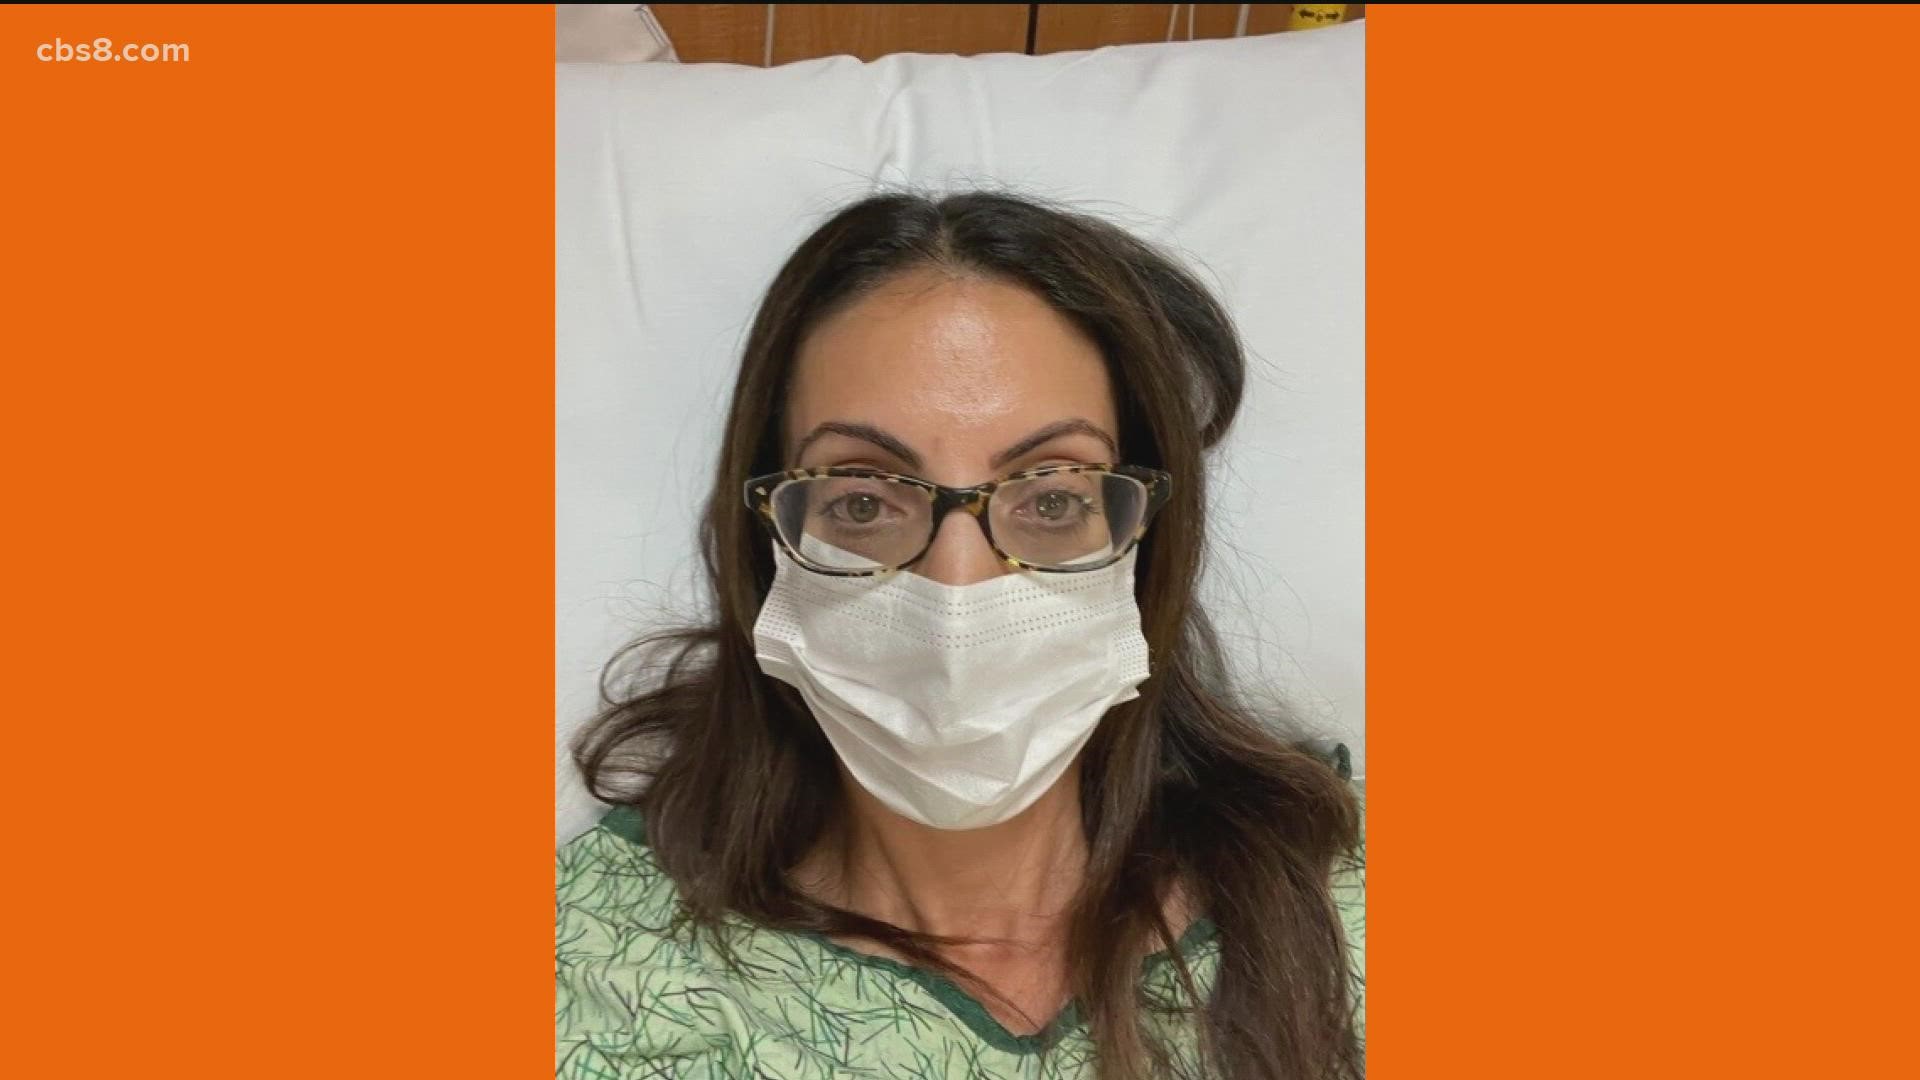 Dr. Reema Batra, oncologist, Sharp Grossmont Hospital shares what it was like to find out she was going to be the patient.